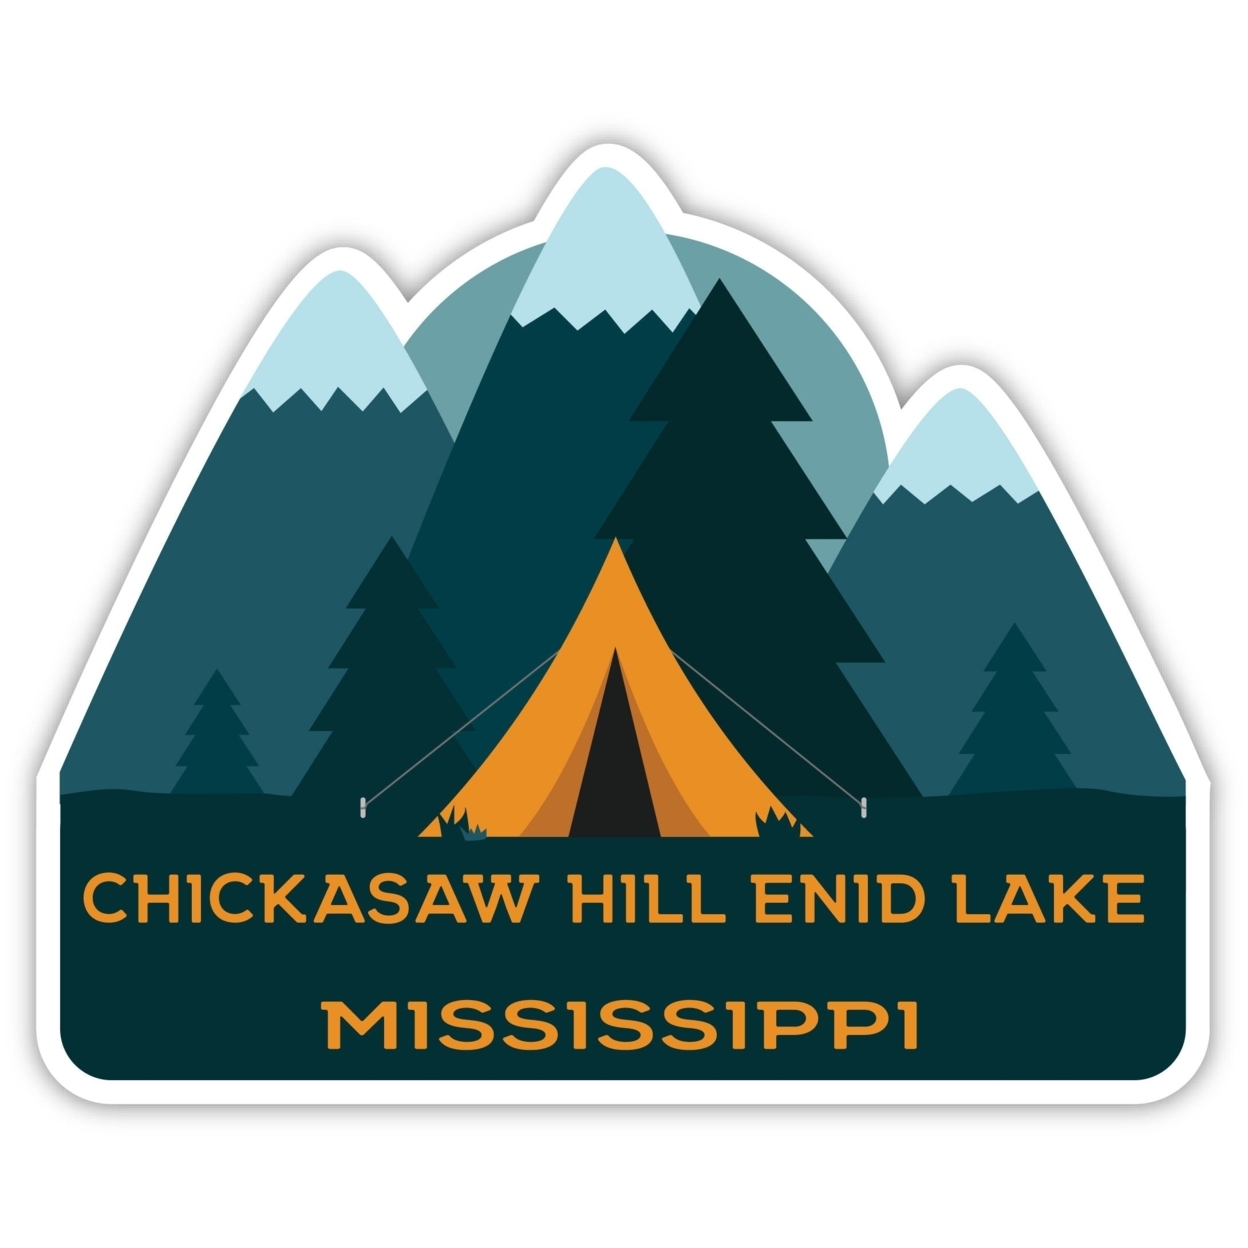 Chickasaw Hill Enid Lake Mississippi Souvenir Decorative Stickers (Choose Theme And Size) - Single Unit, 8-Inch, Tent